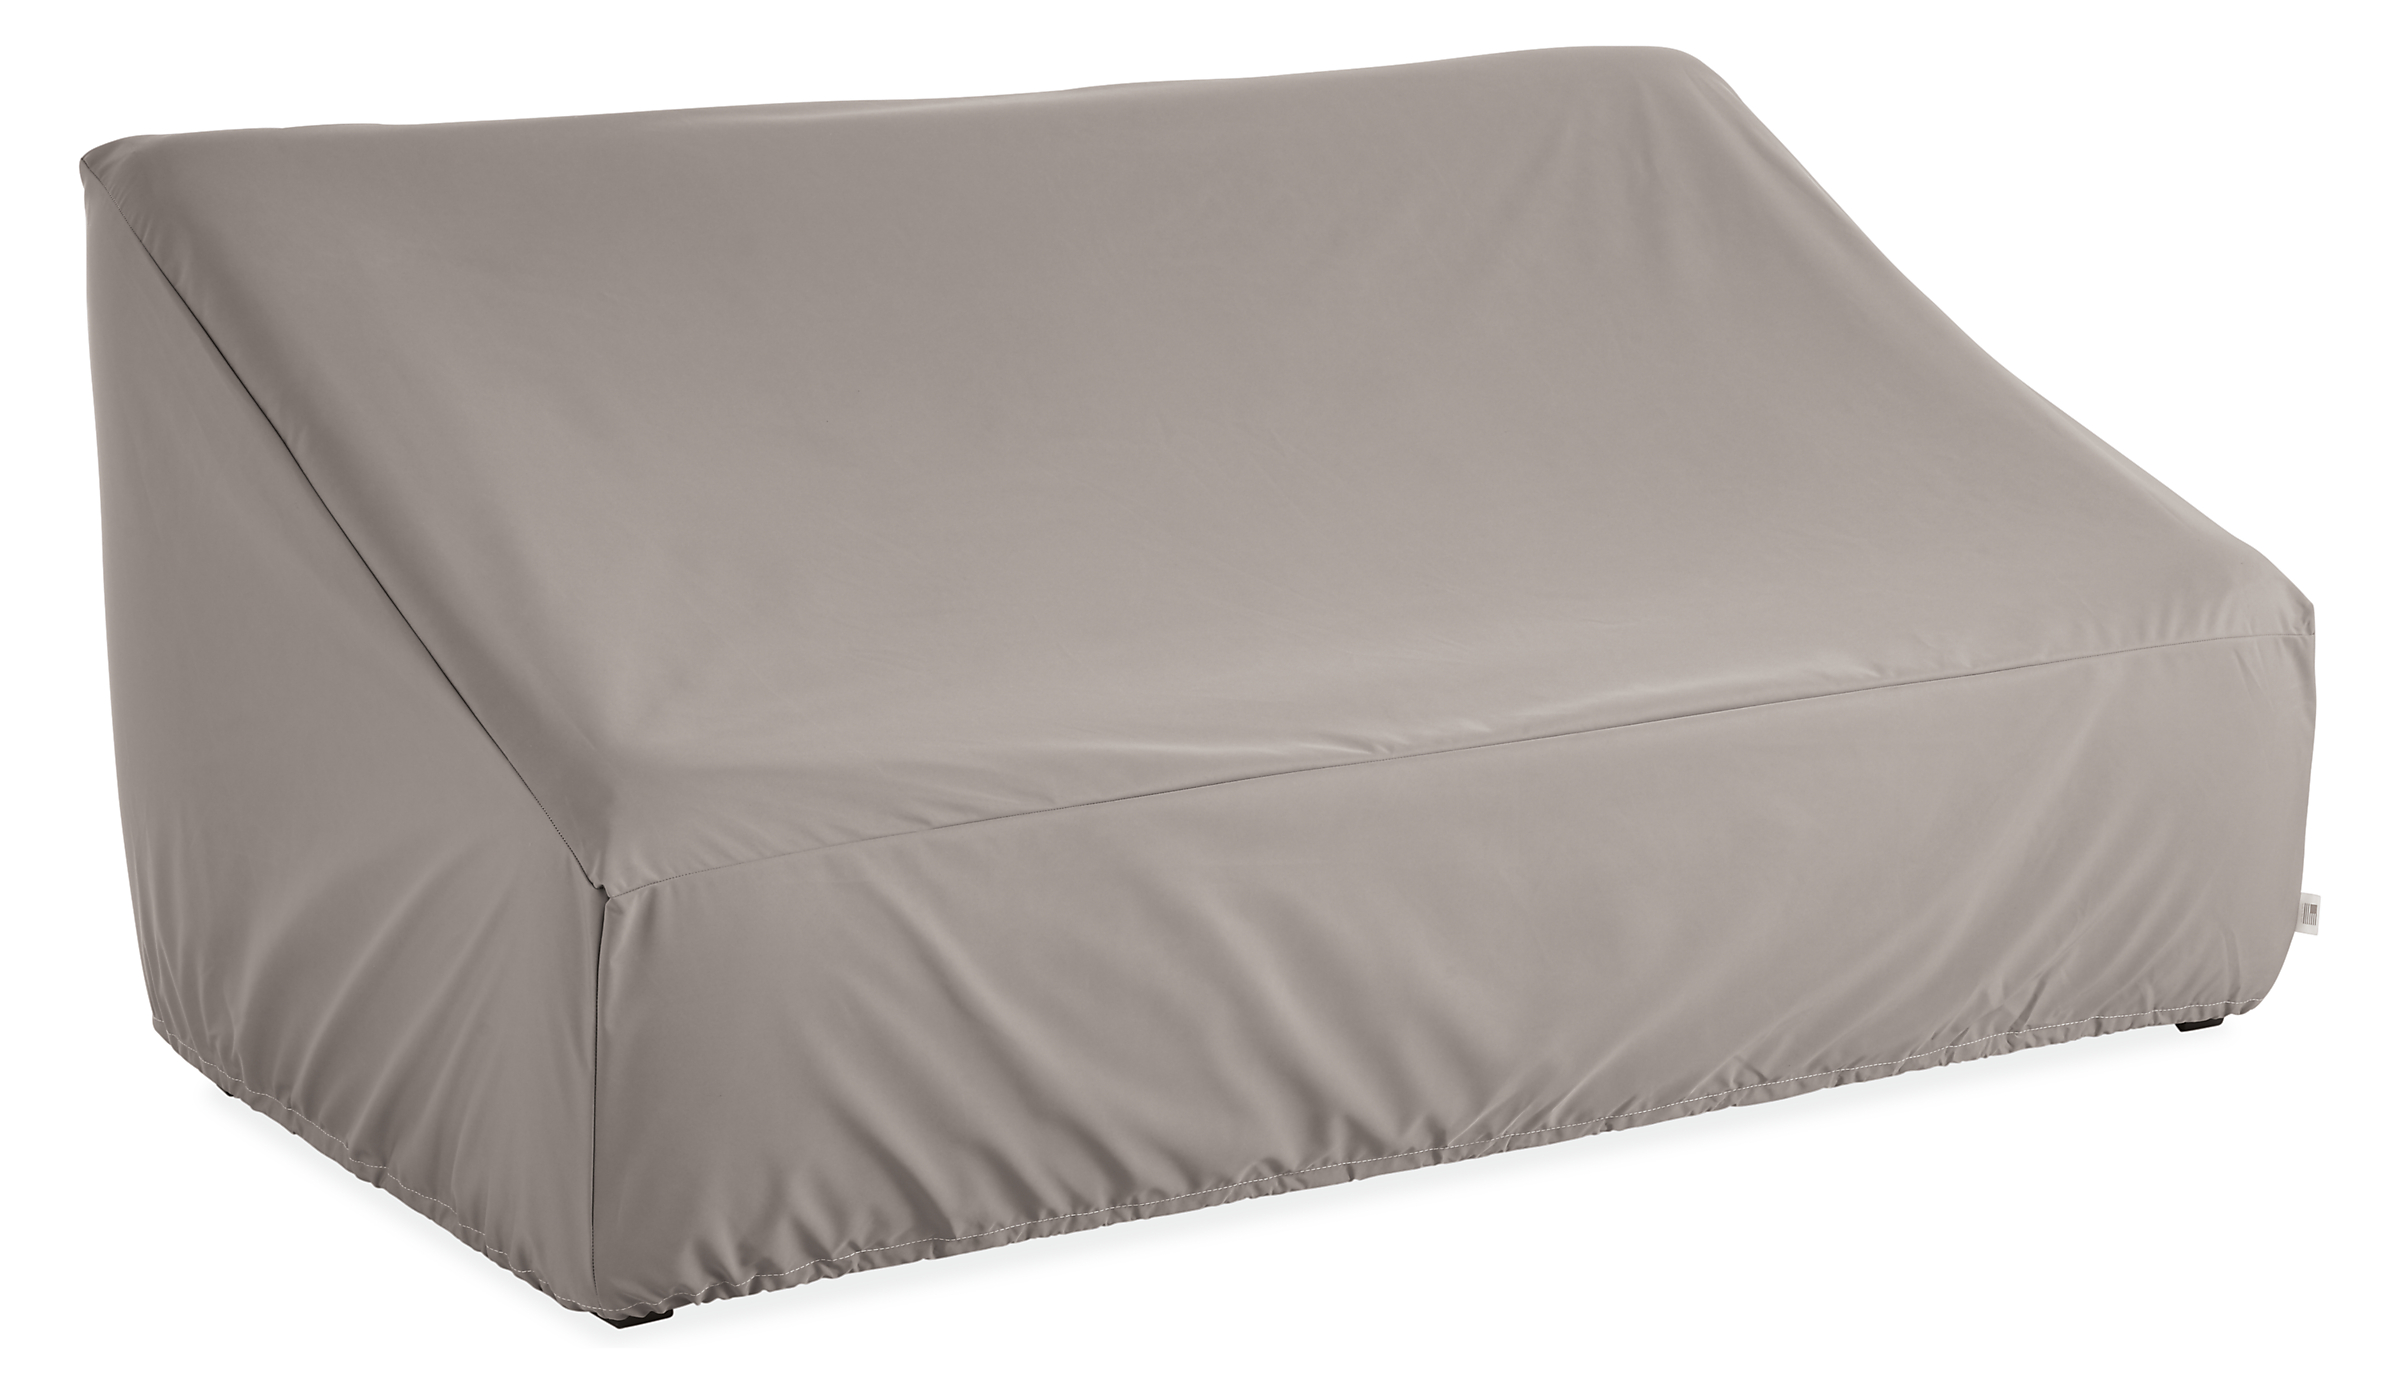 Outdoor Cover for Sofa 61w 35d 29h with Drawstring